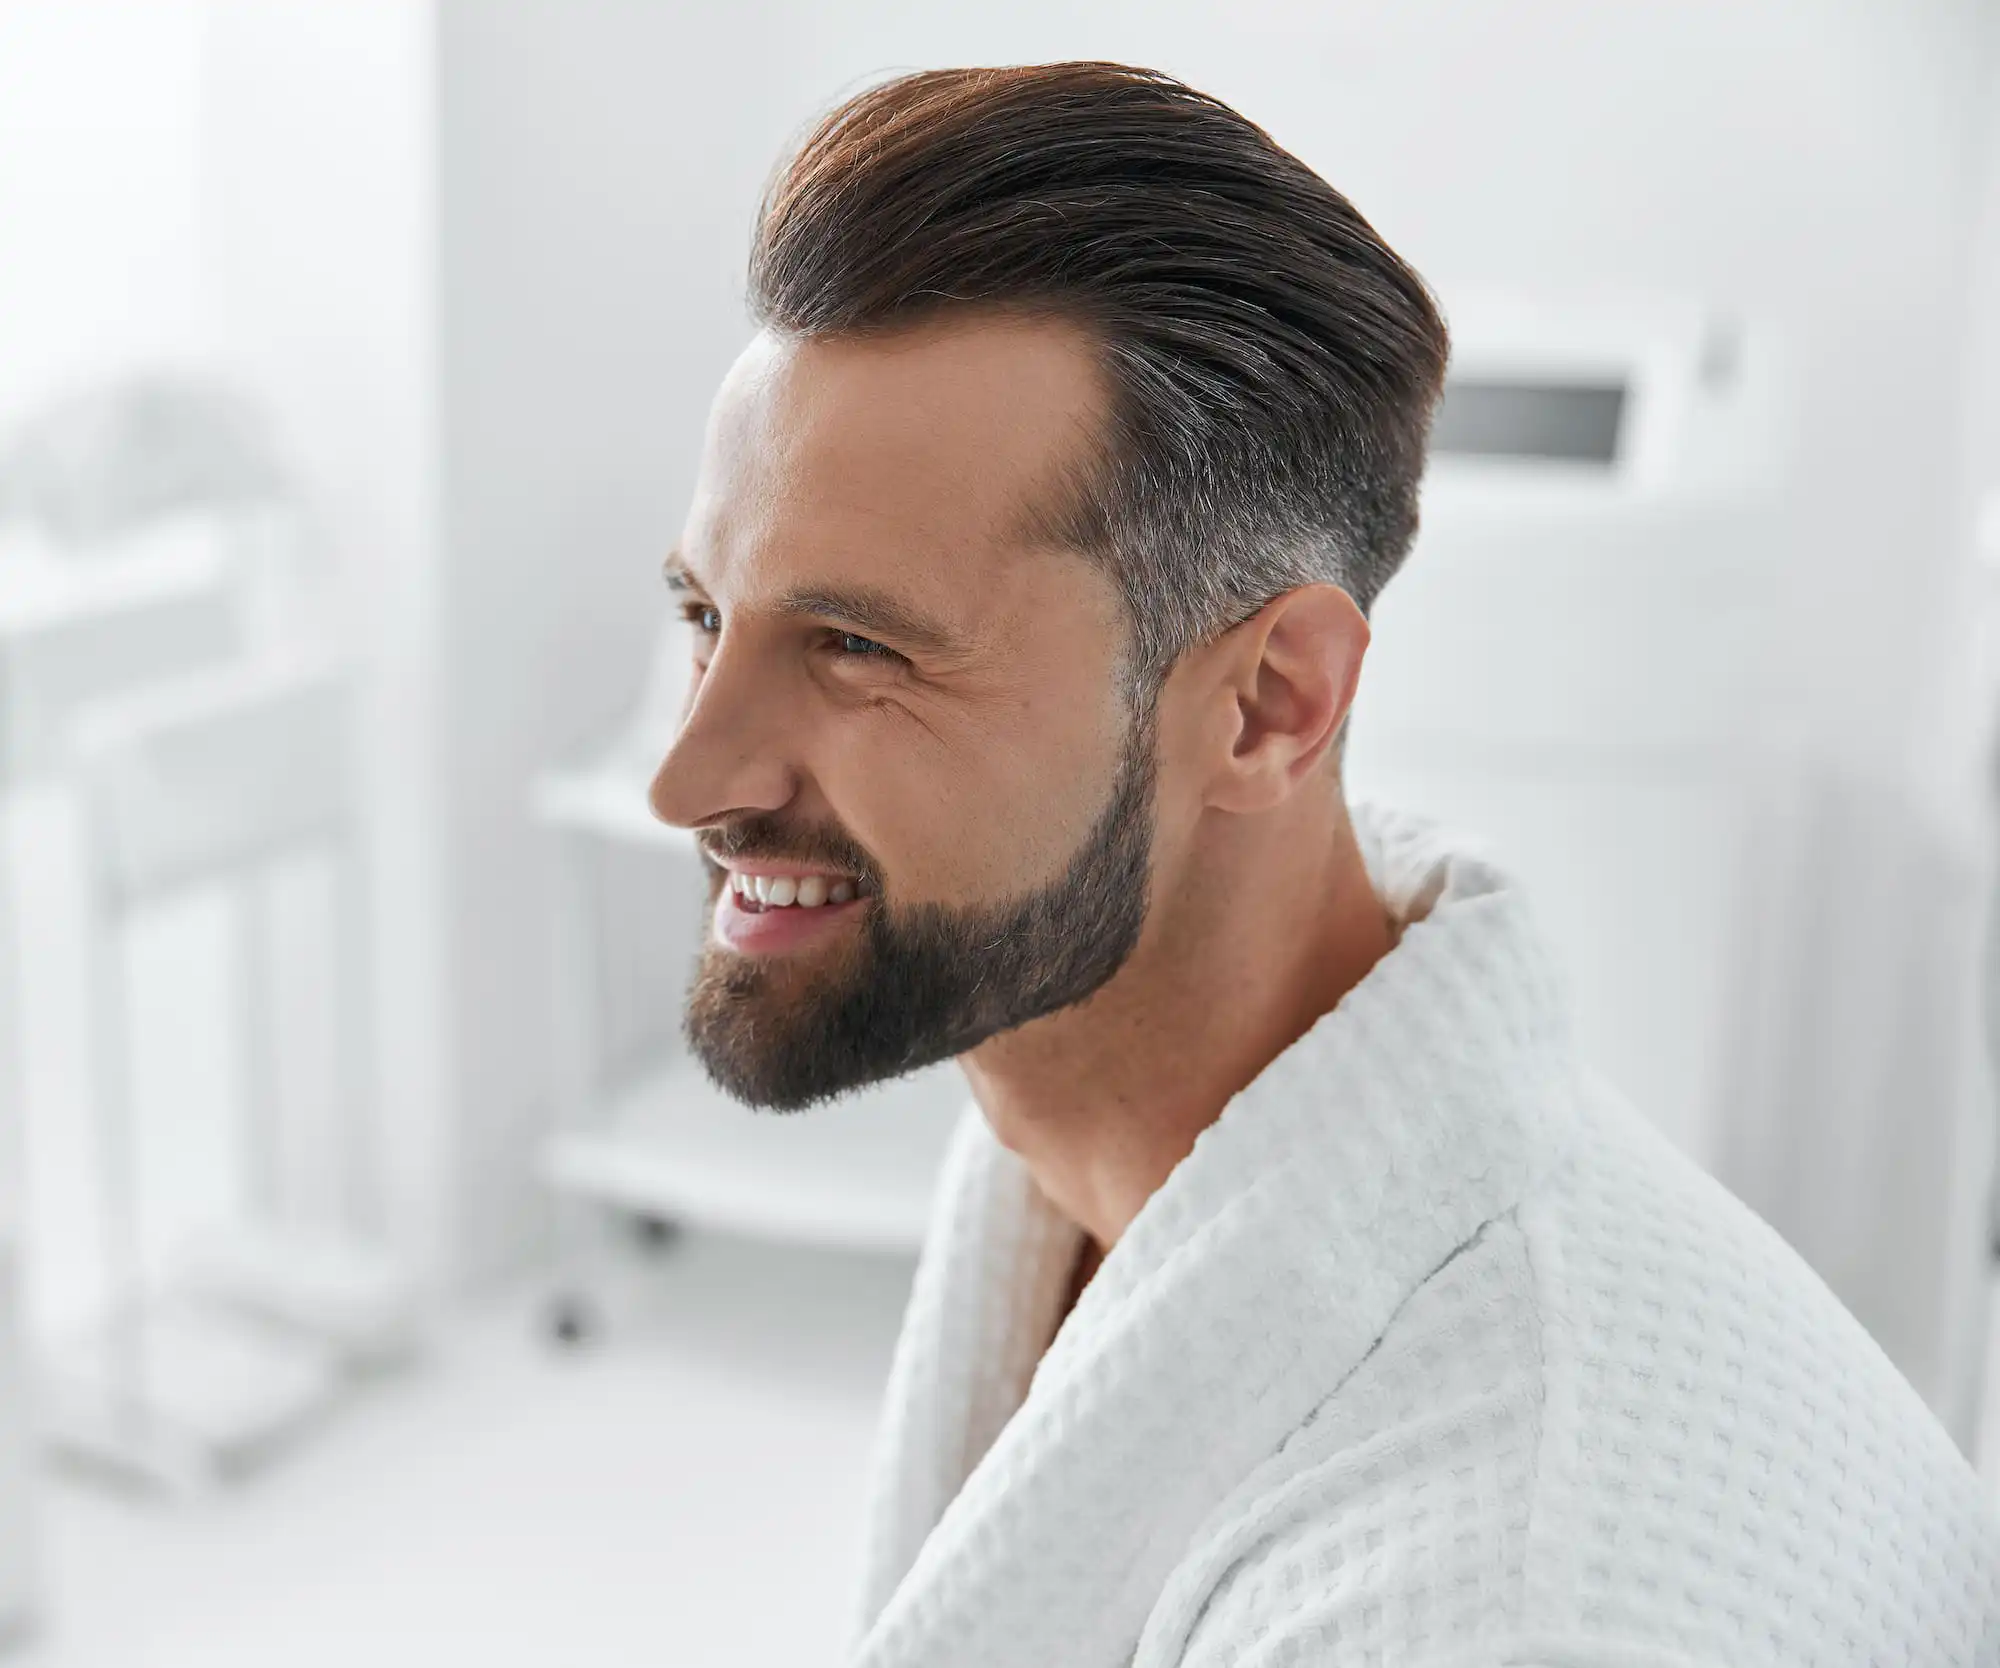 Man with a comb over haircut